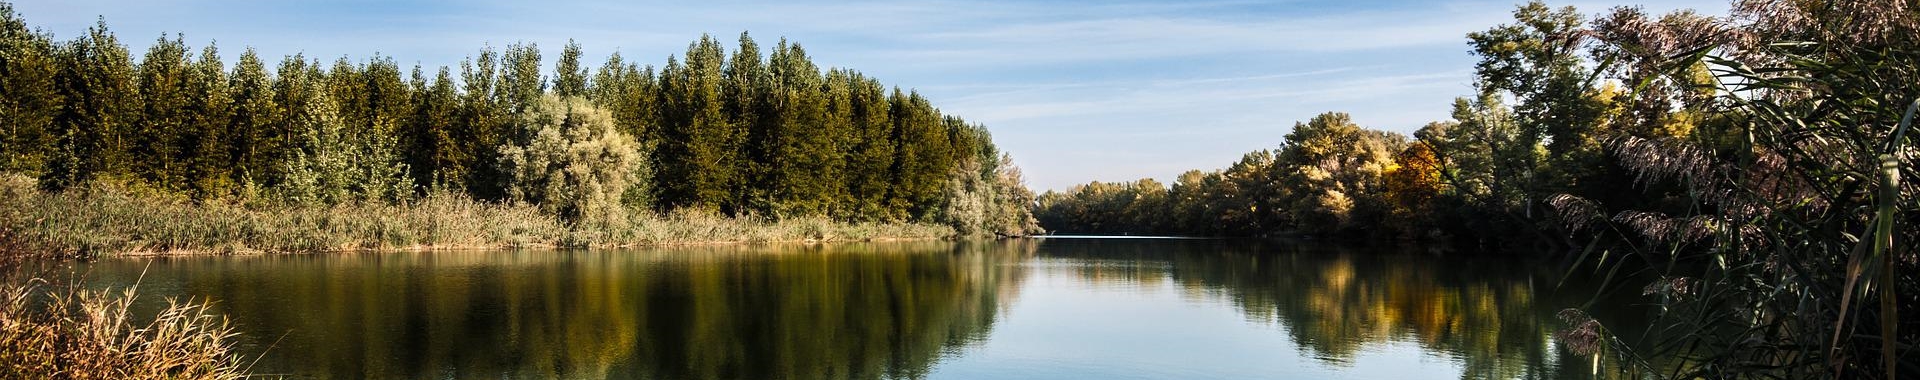 Photograph of a wide, gentle river with trees on both sides